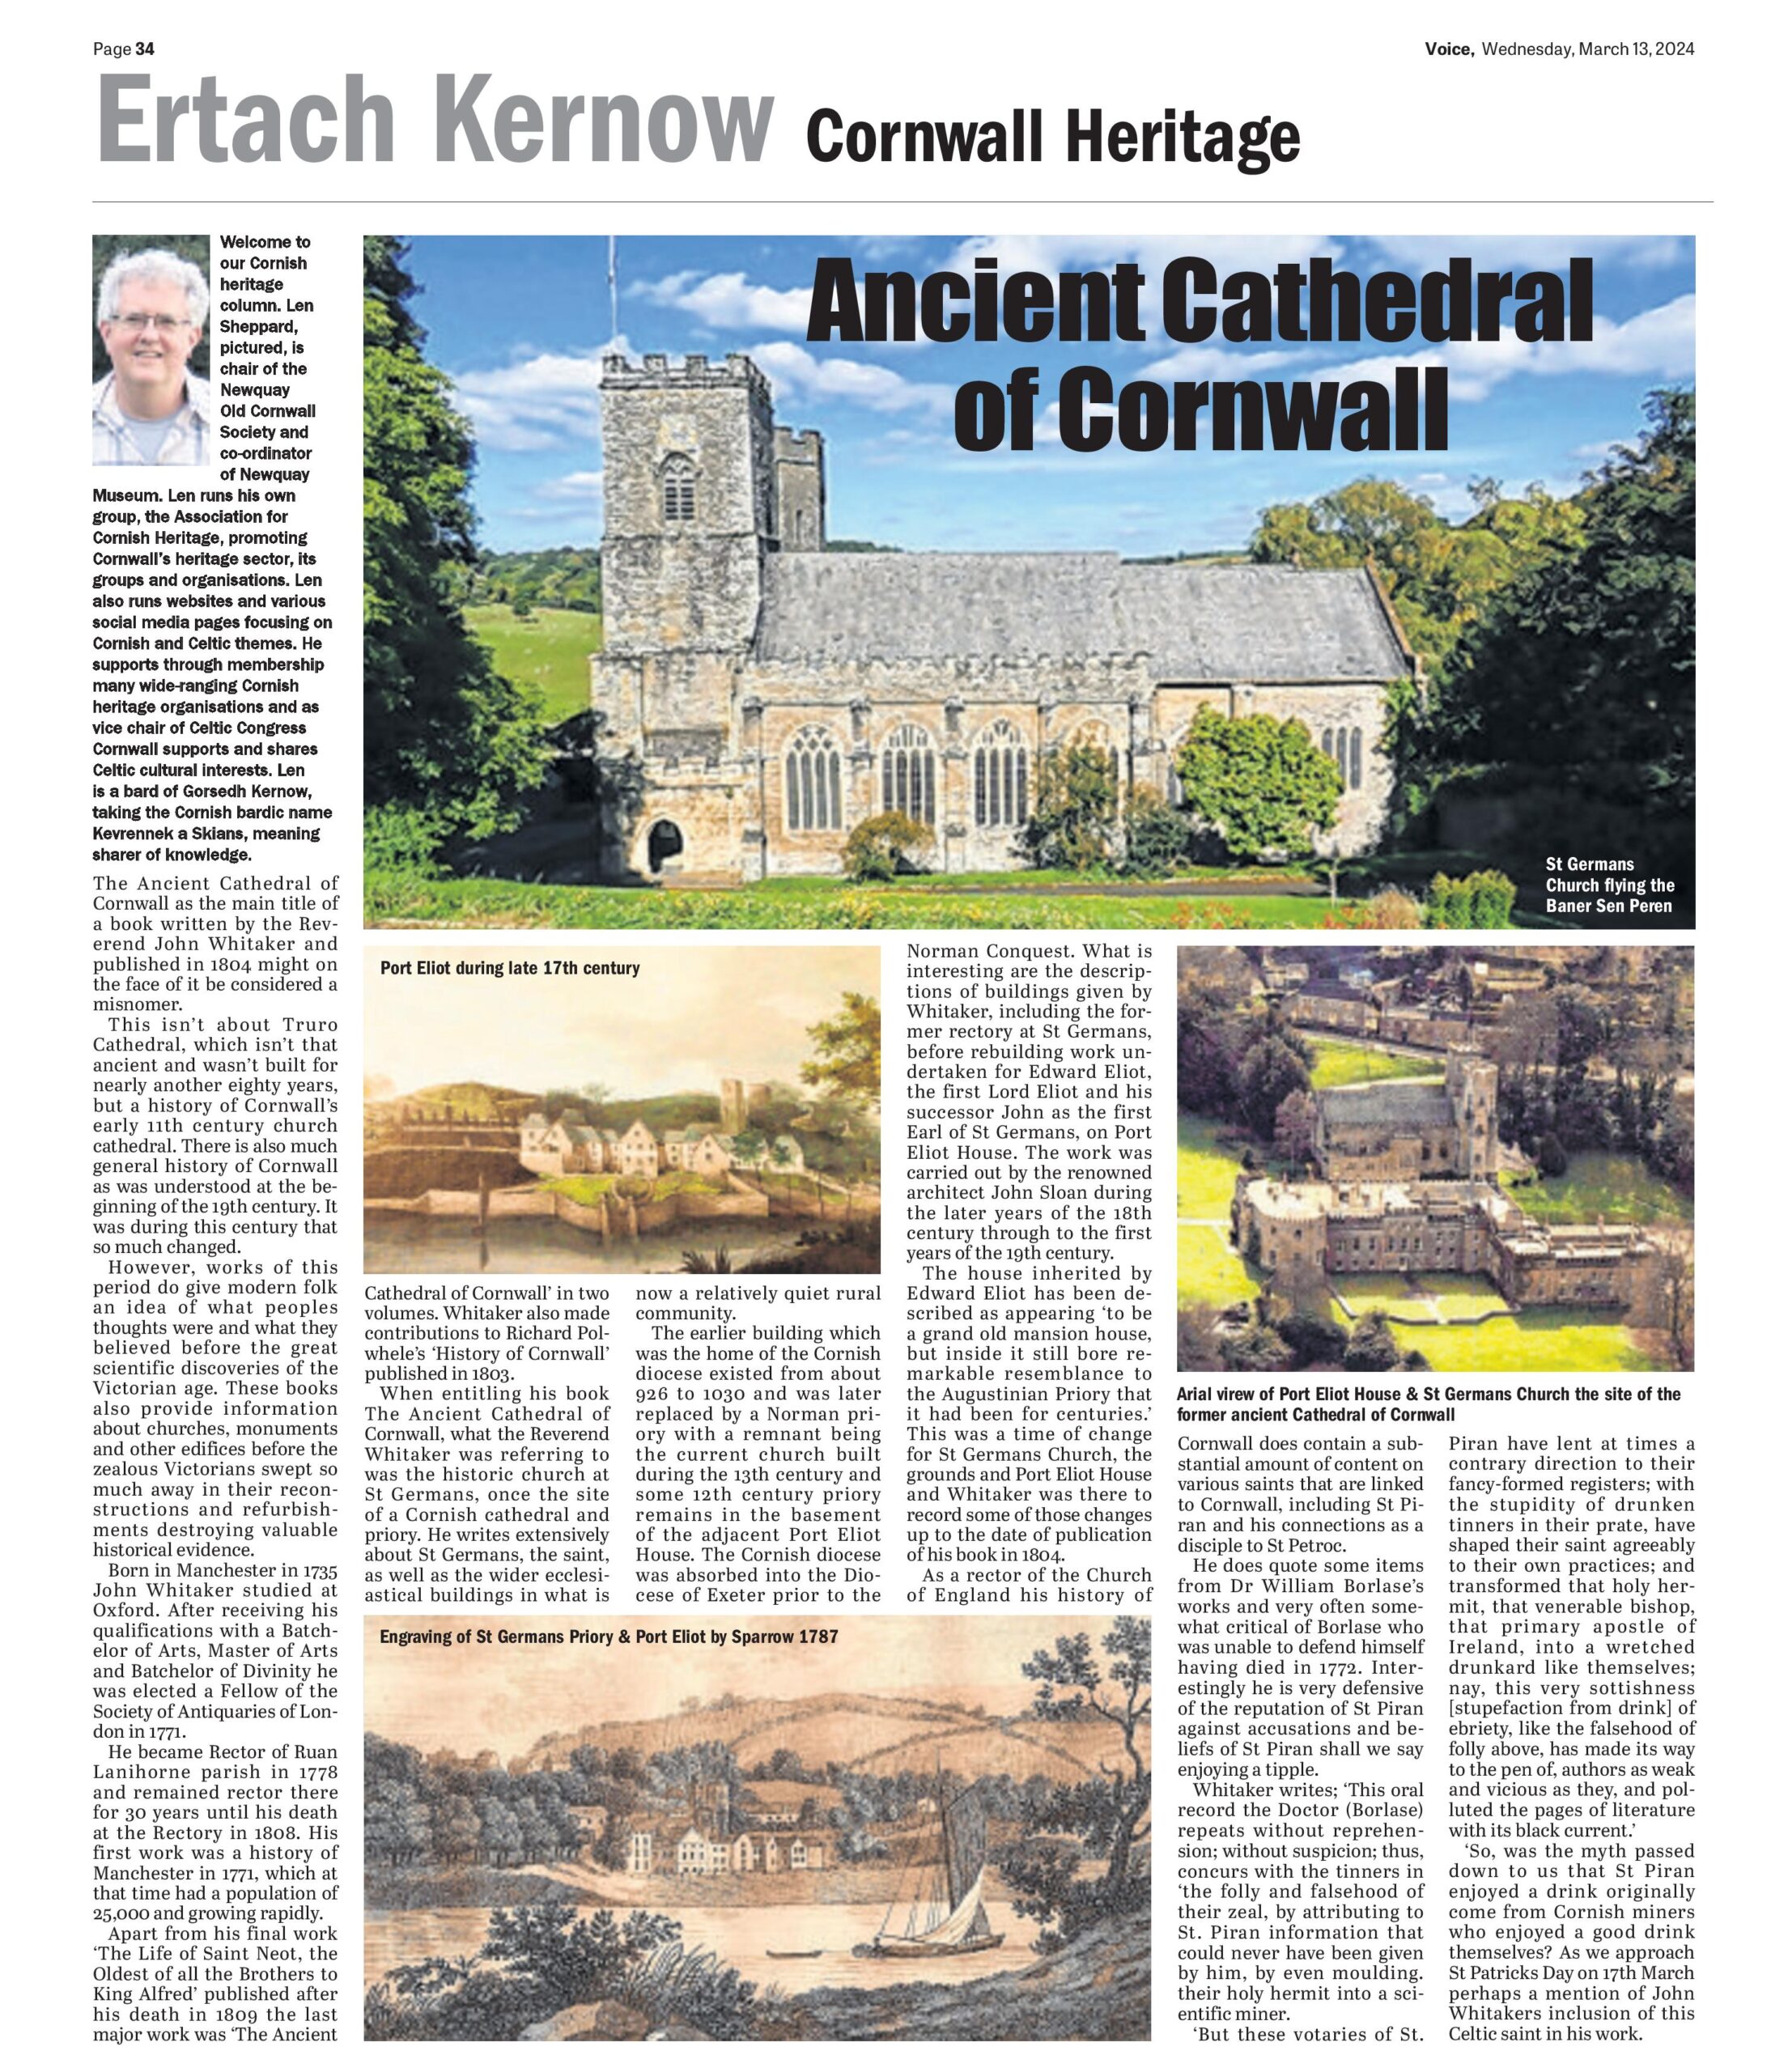 Ancient Cathedral of Cornwall